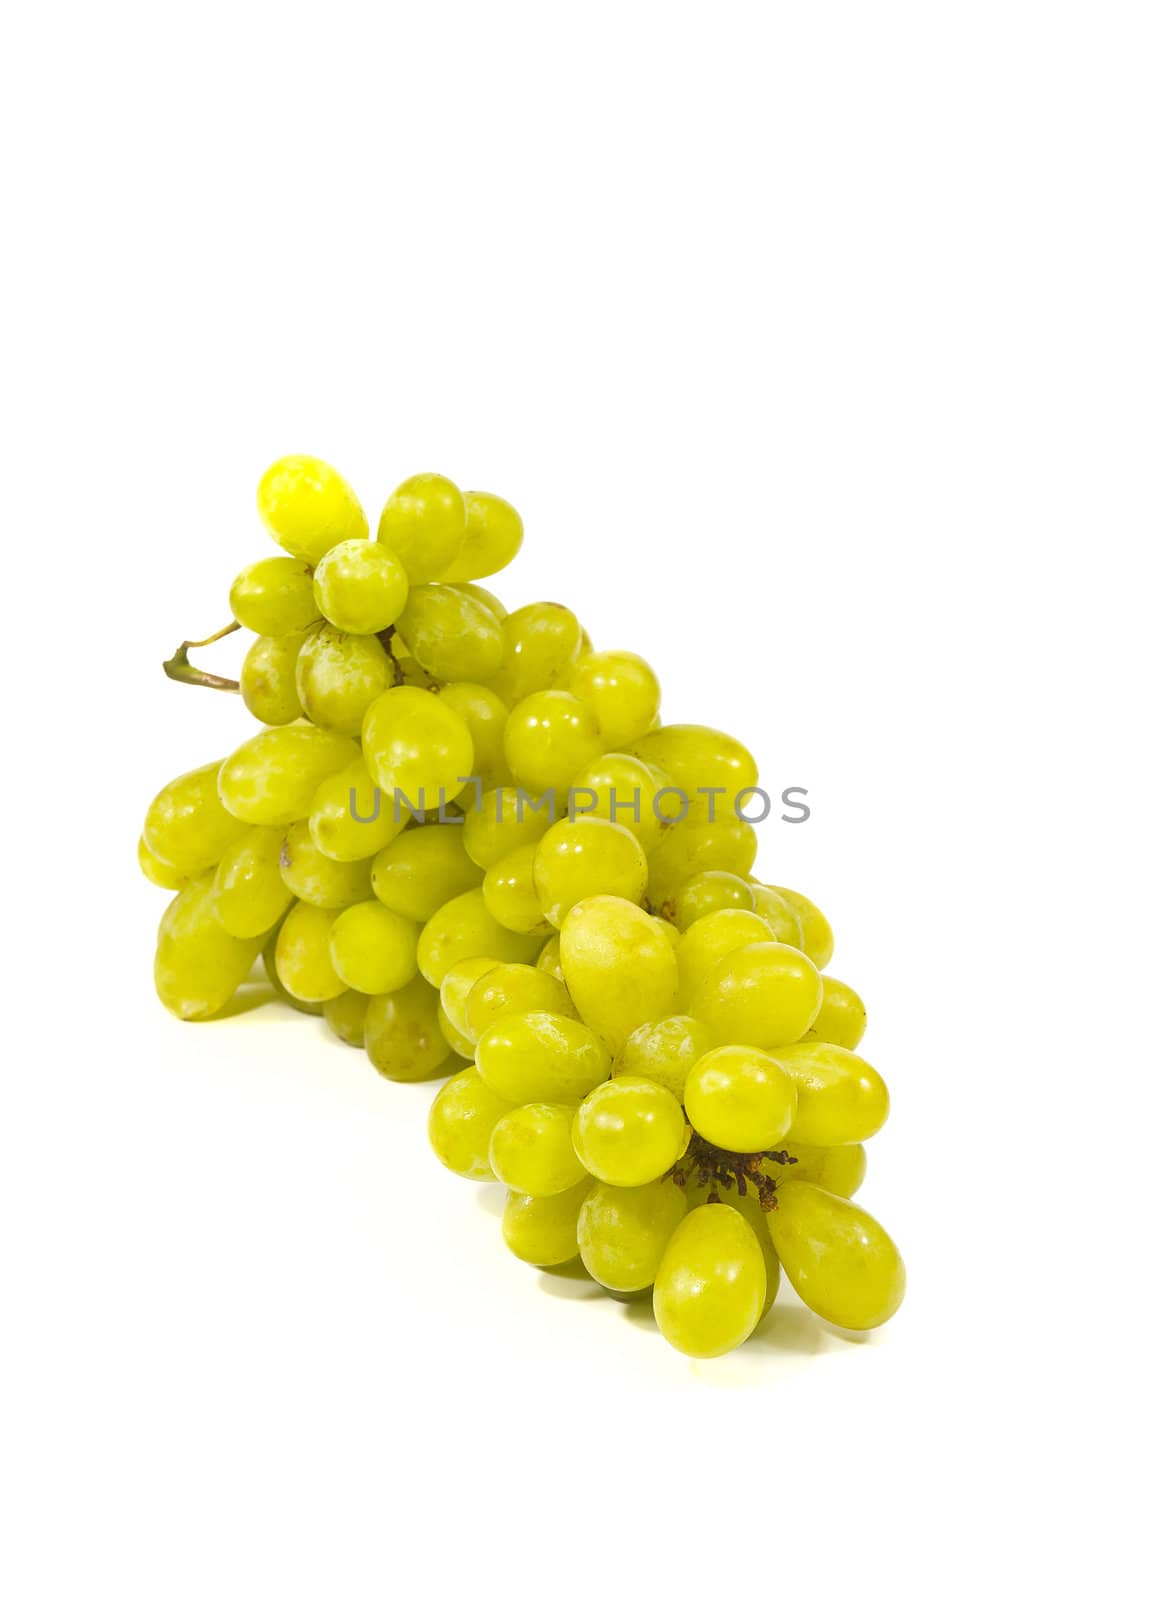 Bunch of ripe and juicy green grapes close-up on a white background